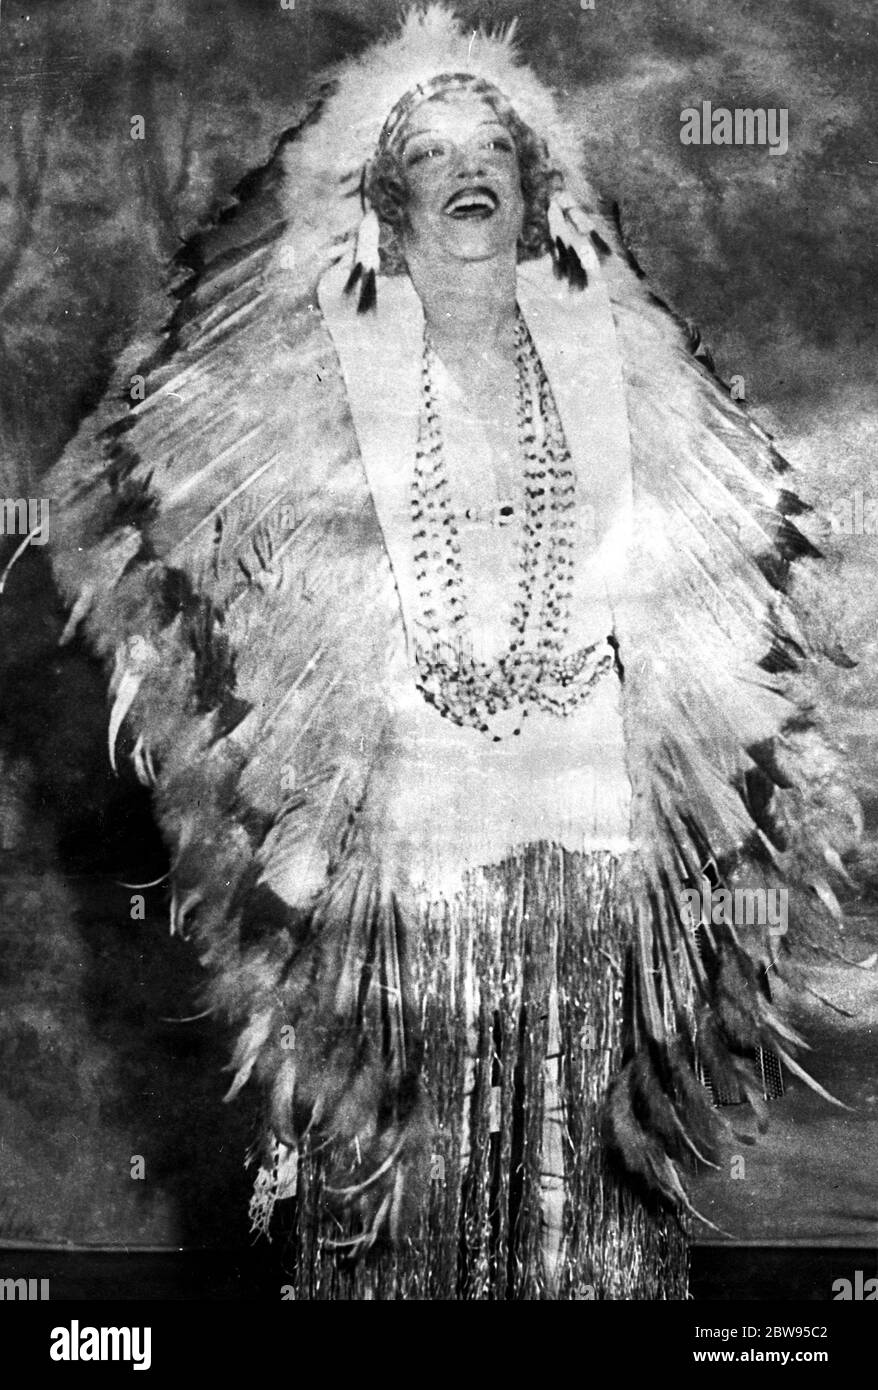 America 's Night Club Queen dons feathers . Texas Guinan , the famous night club Queen of America who has been continually in trouble with the police for some time , in full Indian feathers and in merry mood at the Beaux Arts Ball in New York . 6 February 1932 Stock Photo